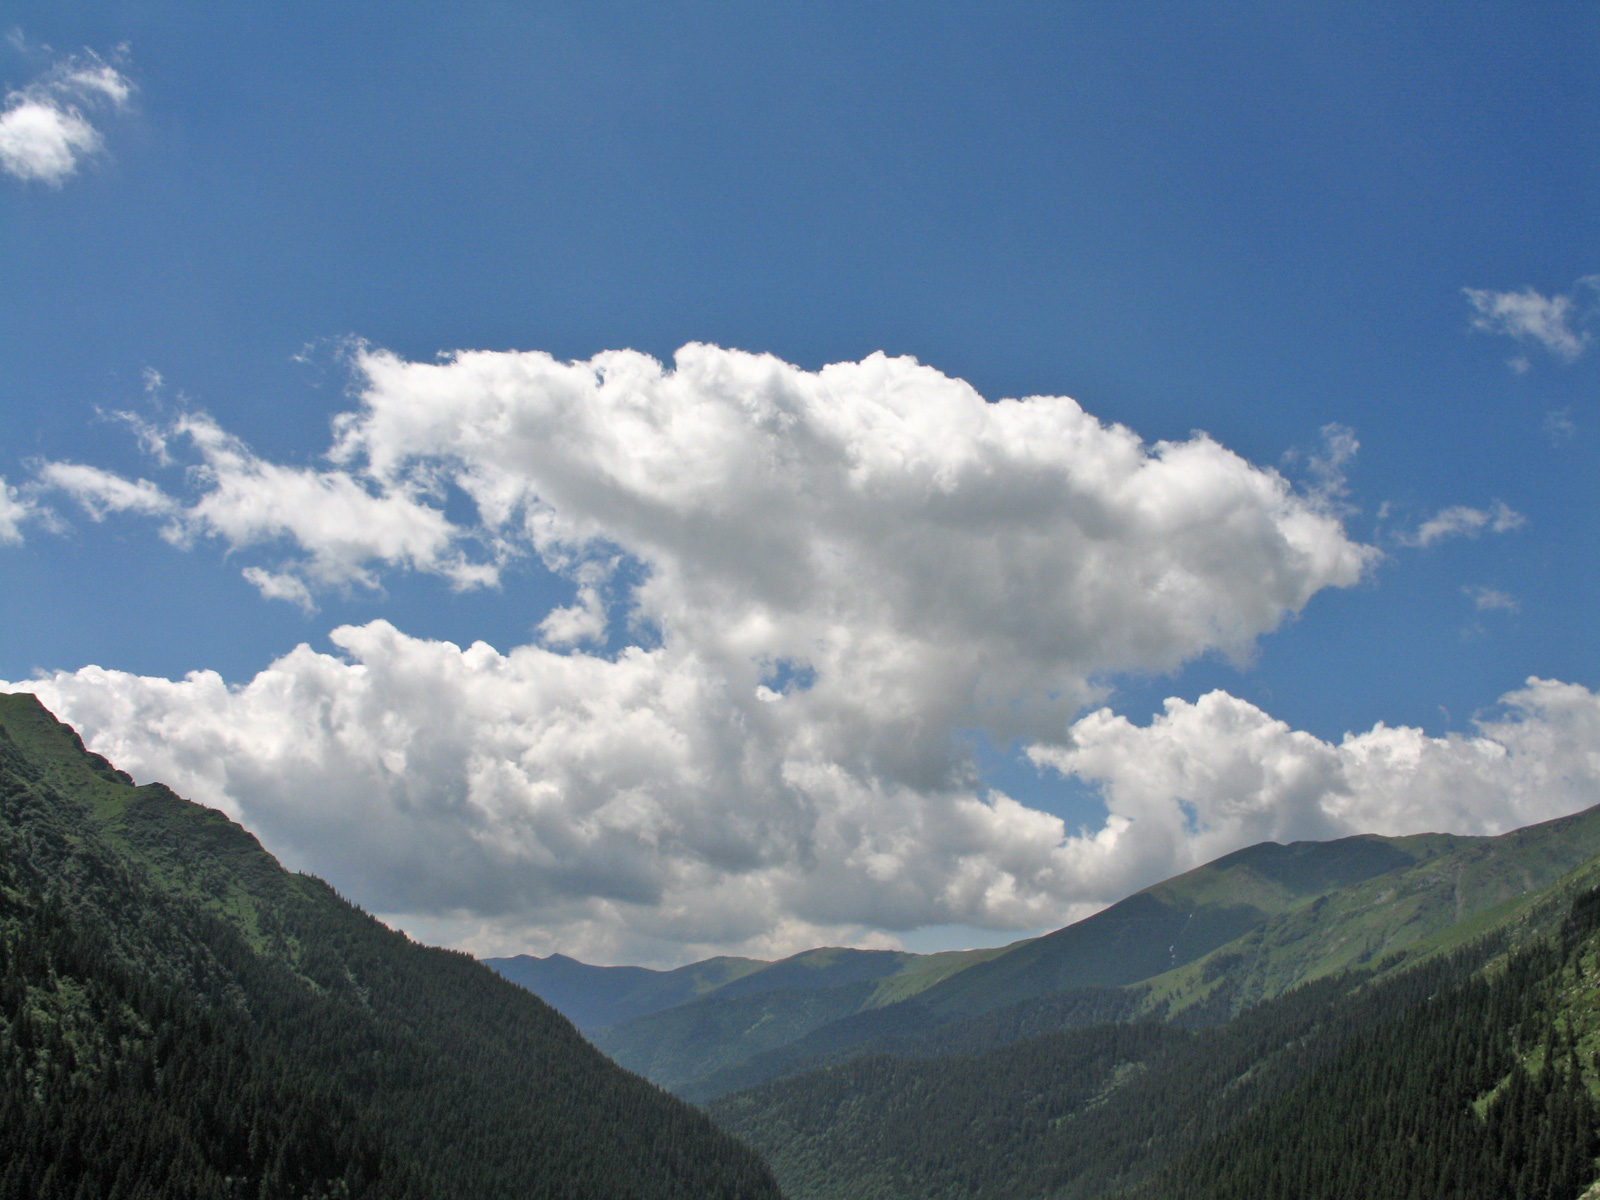 Summer day with puffy clouds over a valley between mountains